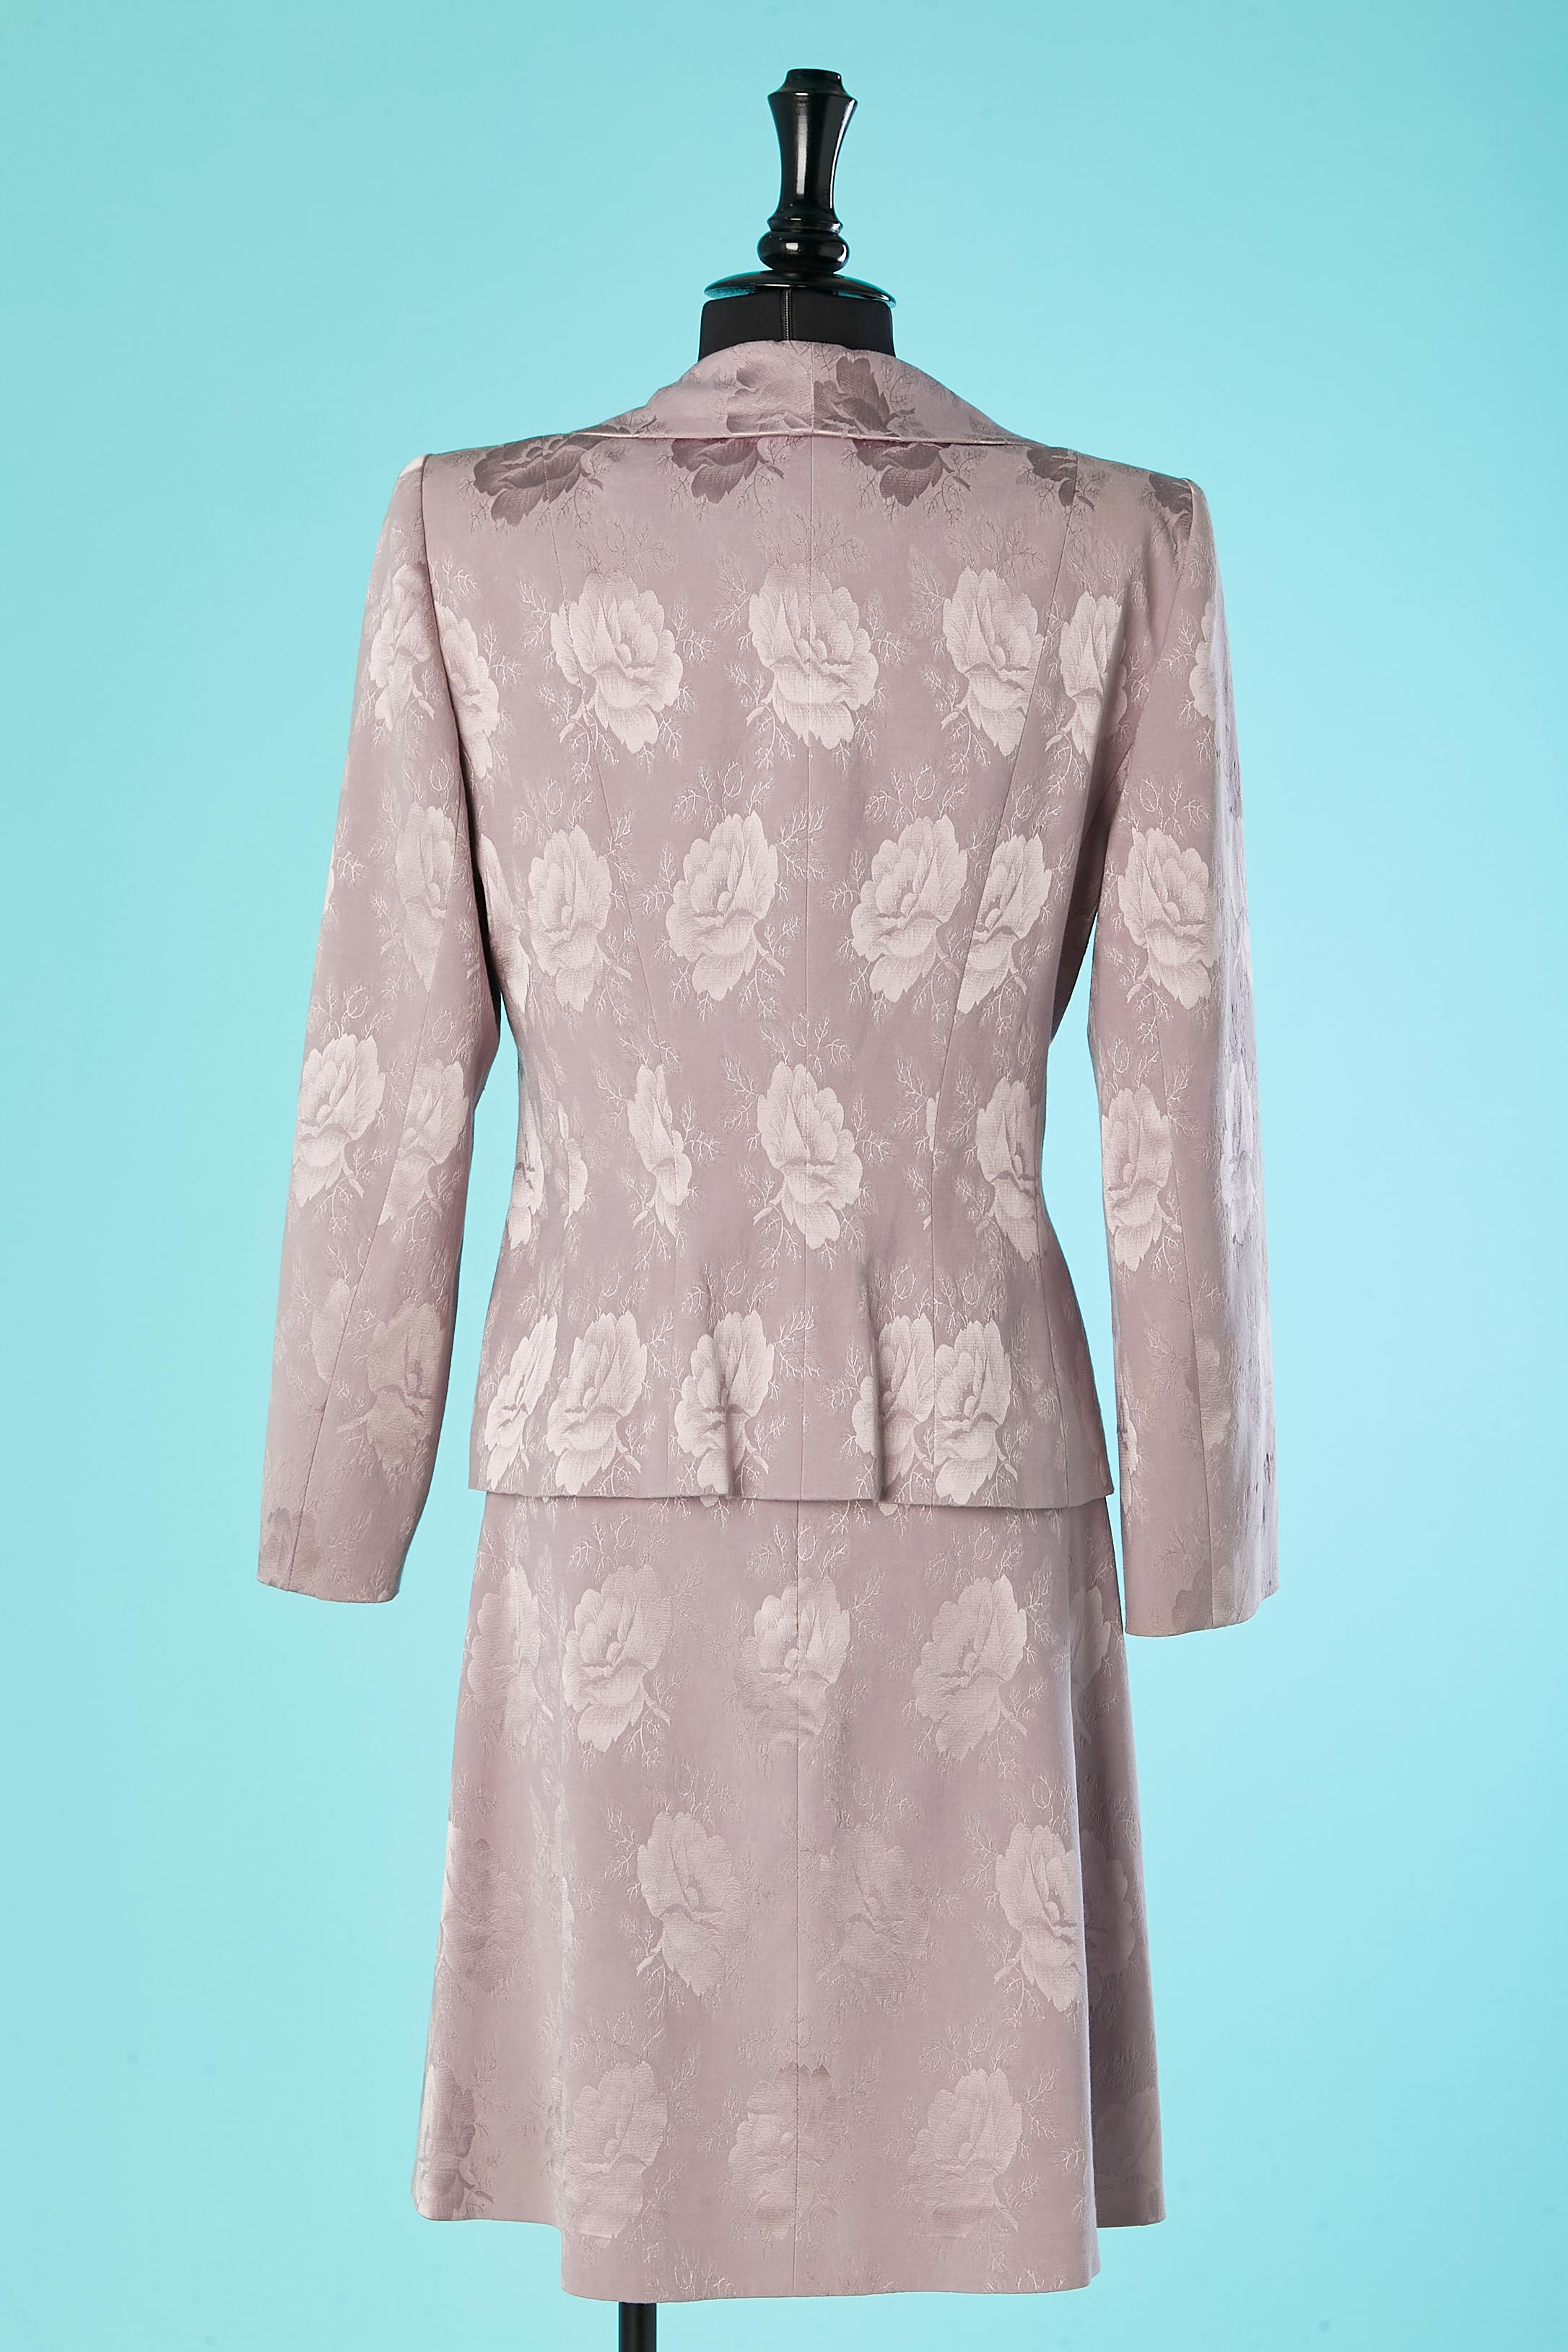 Lilac jacquard skirt suit with flowers pattern Christian Dior Boutique 1980's  For Sale 1